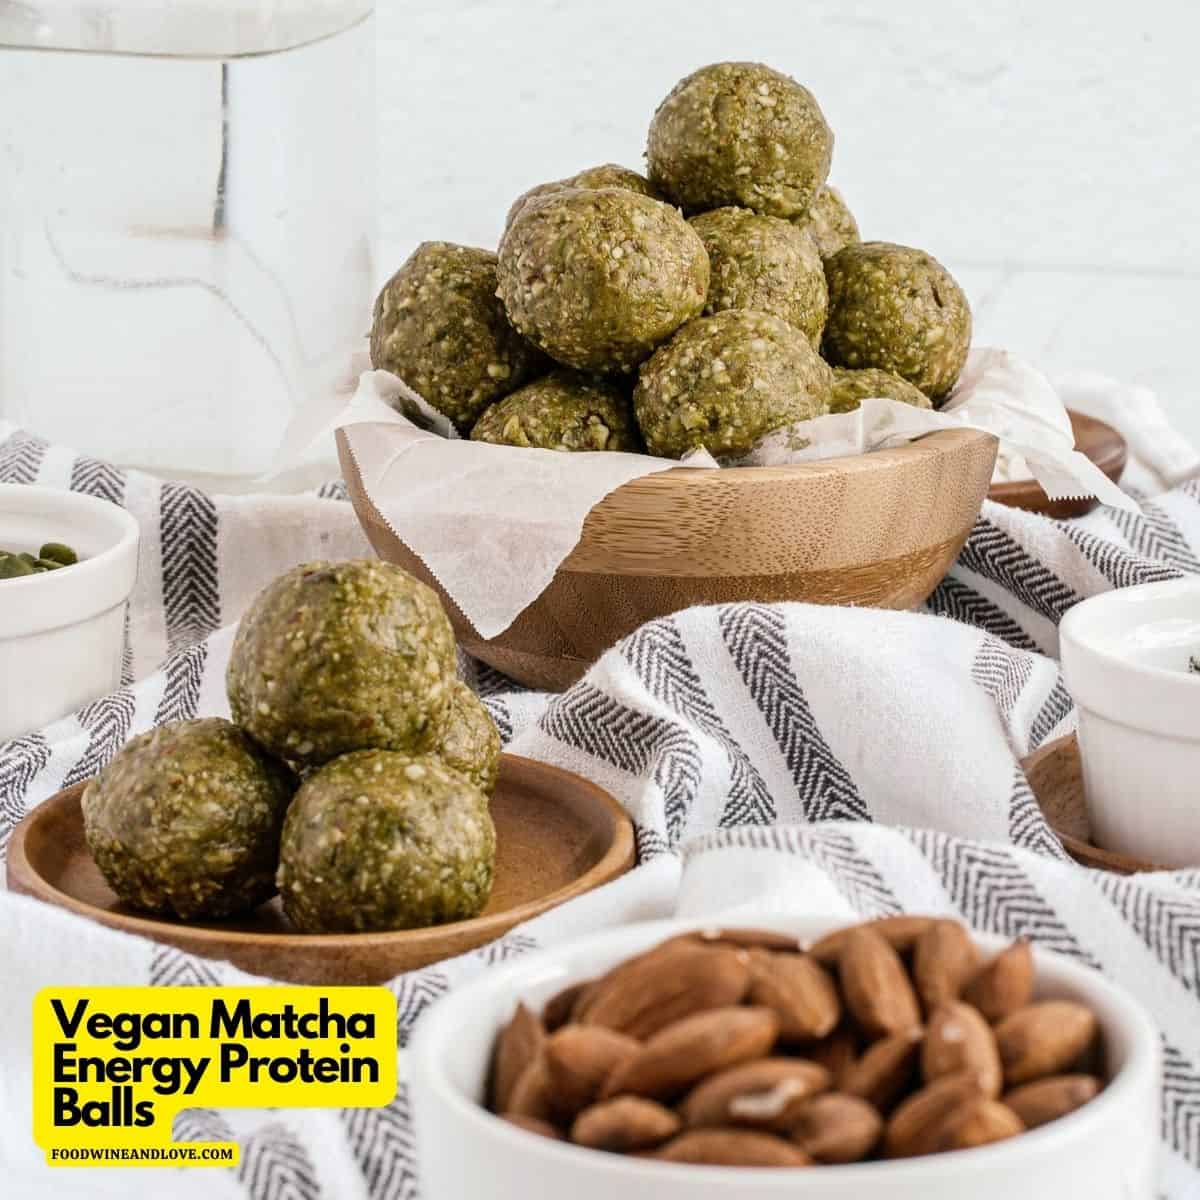 Vegan Matcha Energy Protein Balls, a simple 6 ingredient snack or dessert recipe made with healthy ingredients, sweetened with maple syrup.